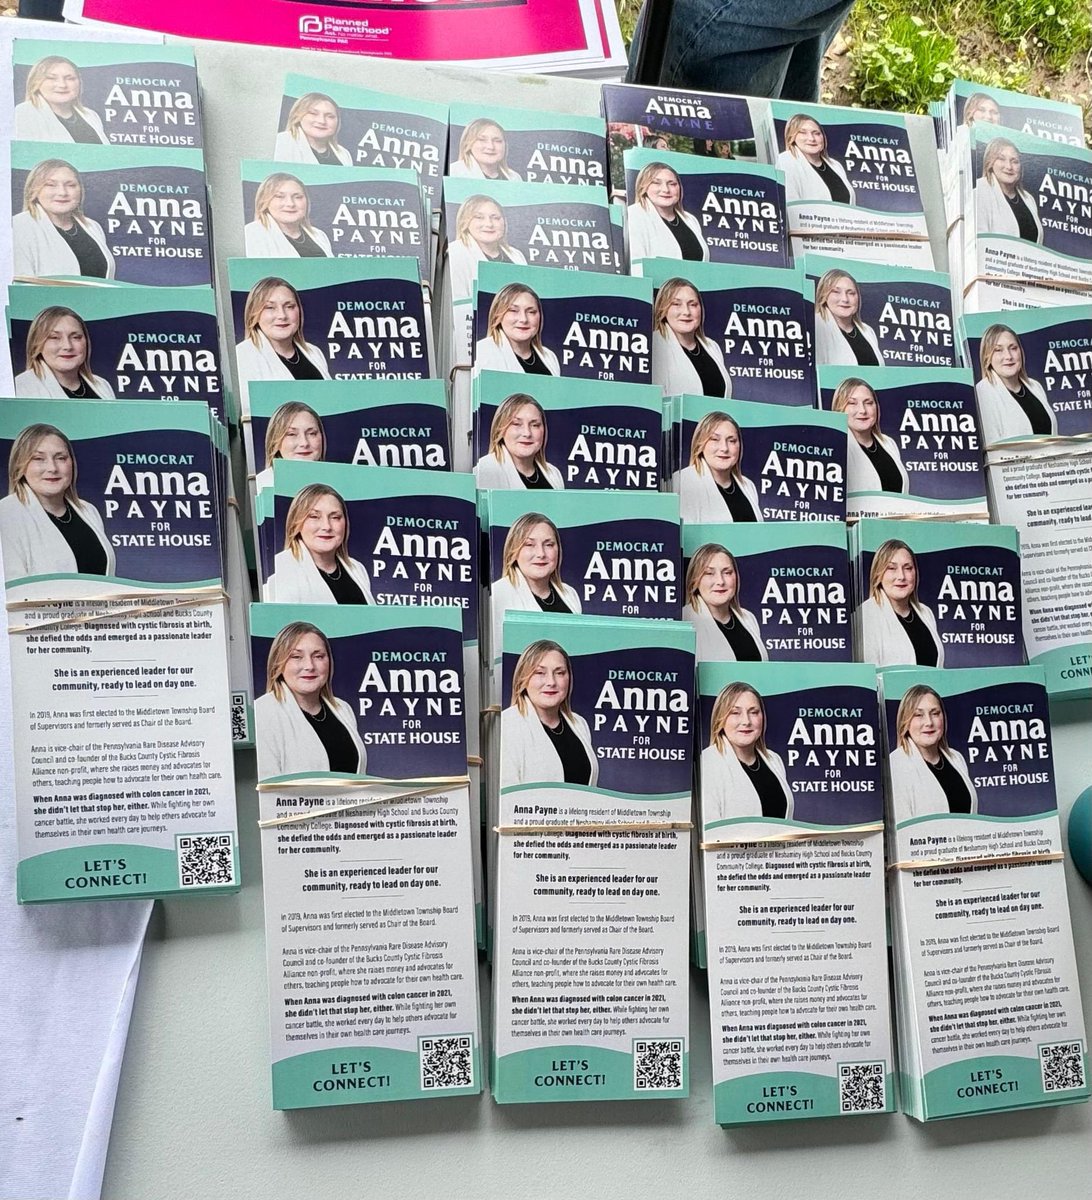 Turn PA Blue was proud to support @AnnaPayne4PA with a Day of Action in the 142nd PA House district today. With Donald Trump less than a mile away for fundraiser, our volunteers had the best protest of all, helping to replace a Republican with Democrat Anna Payne!